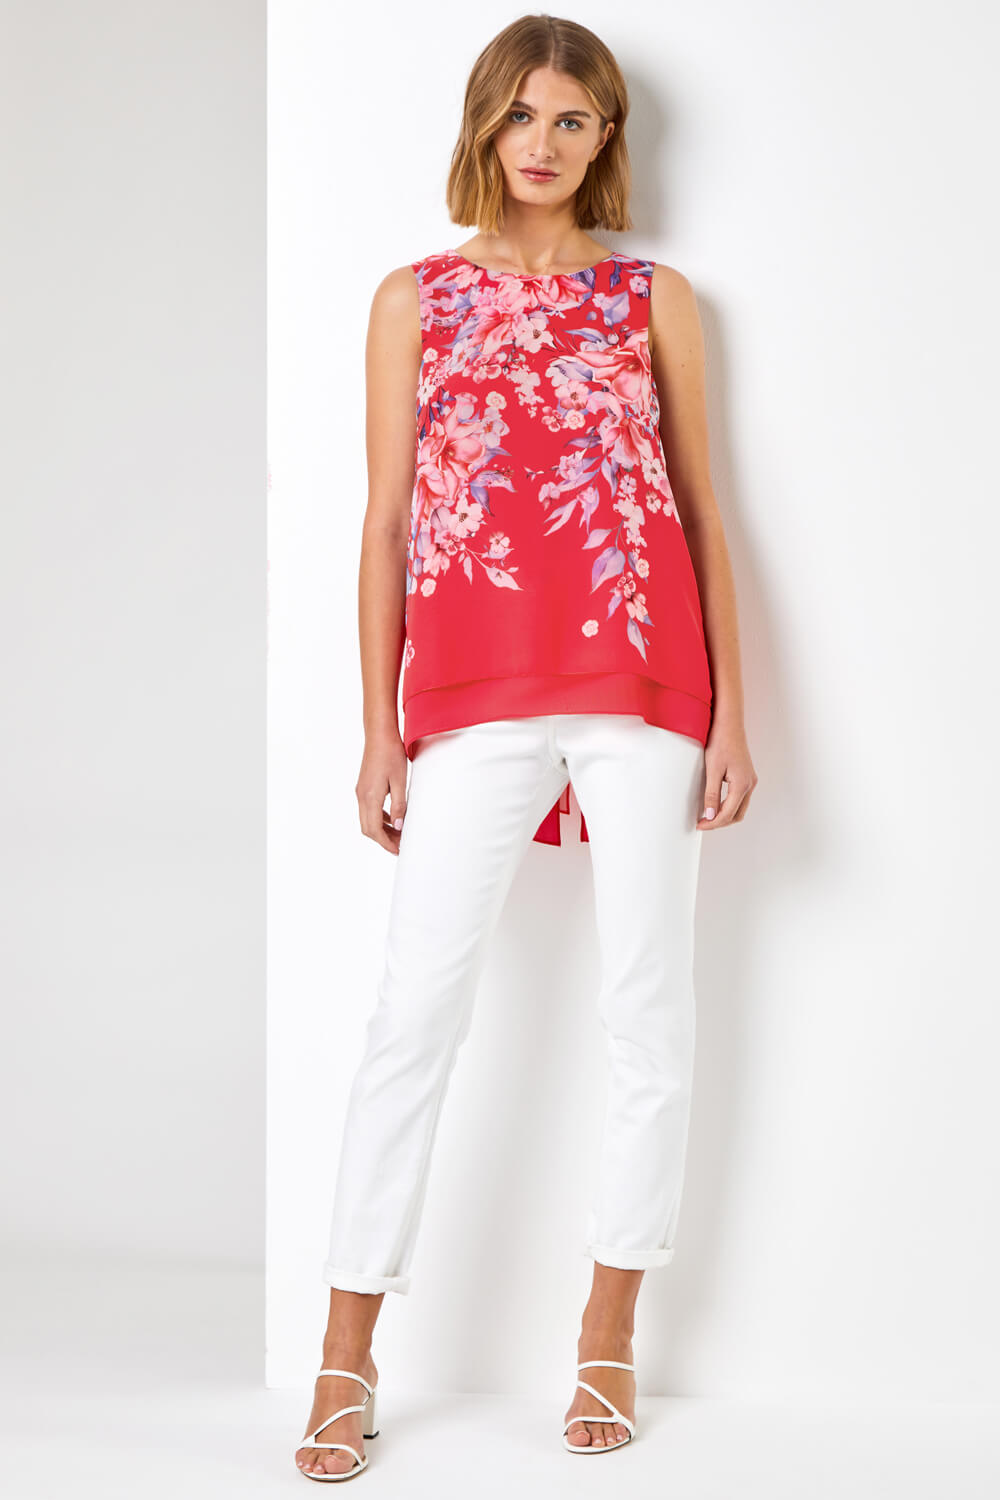 Red Floral Print Chiffon Overlay Top, Image 3 of 4